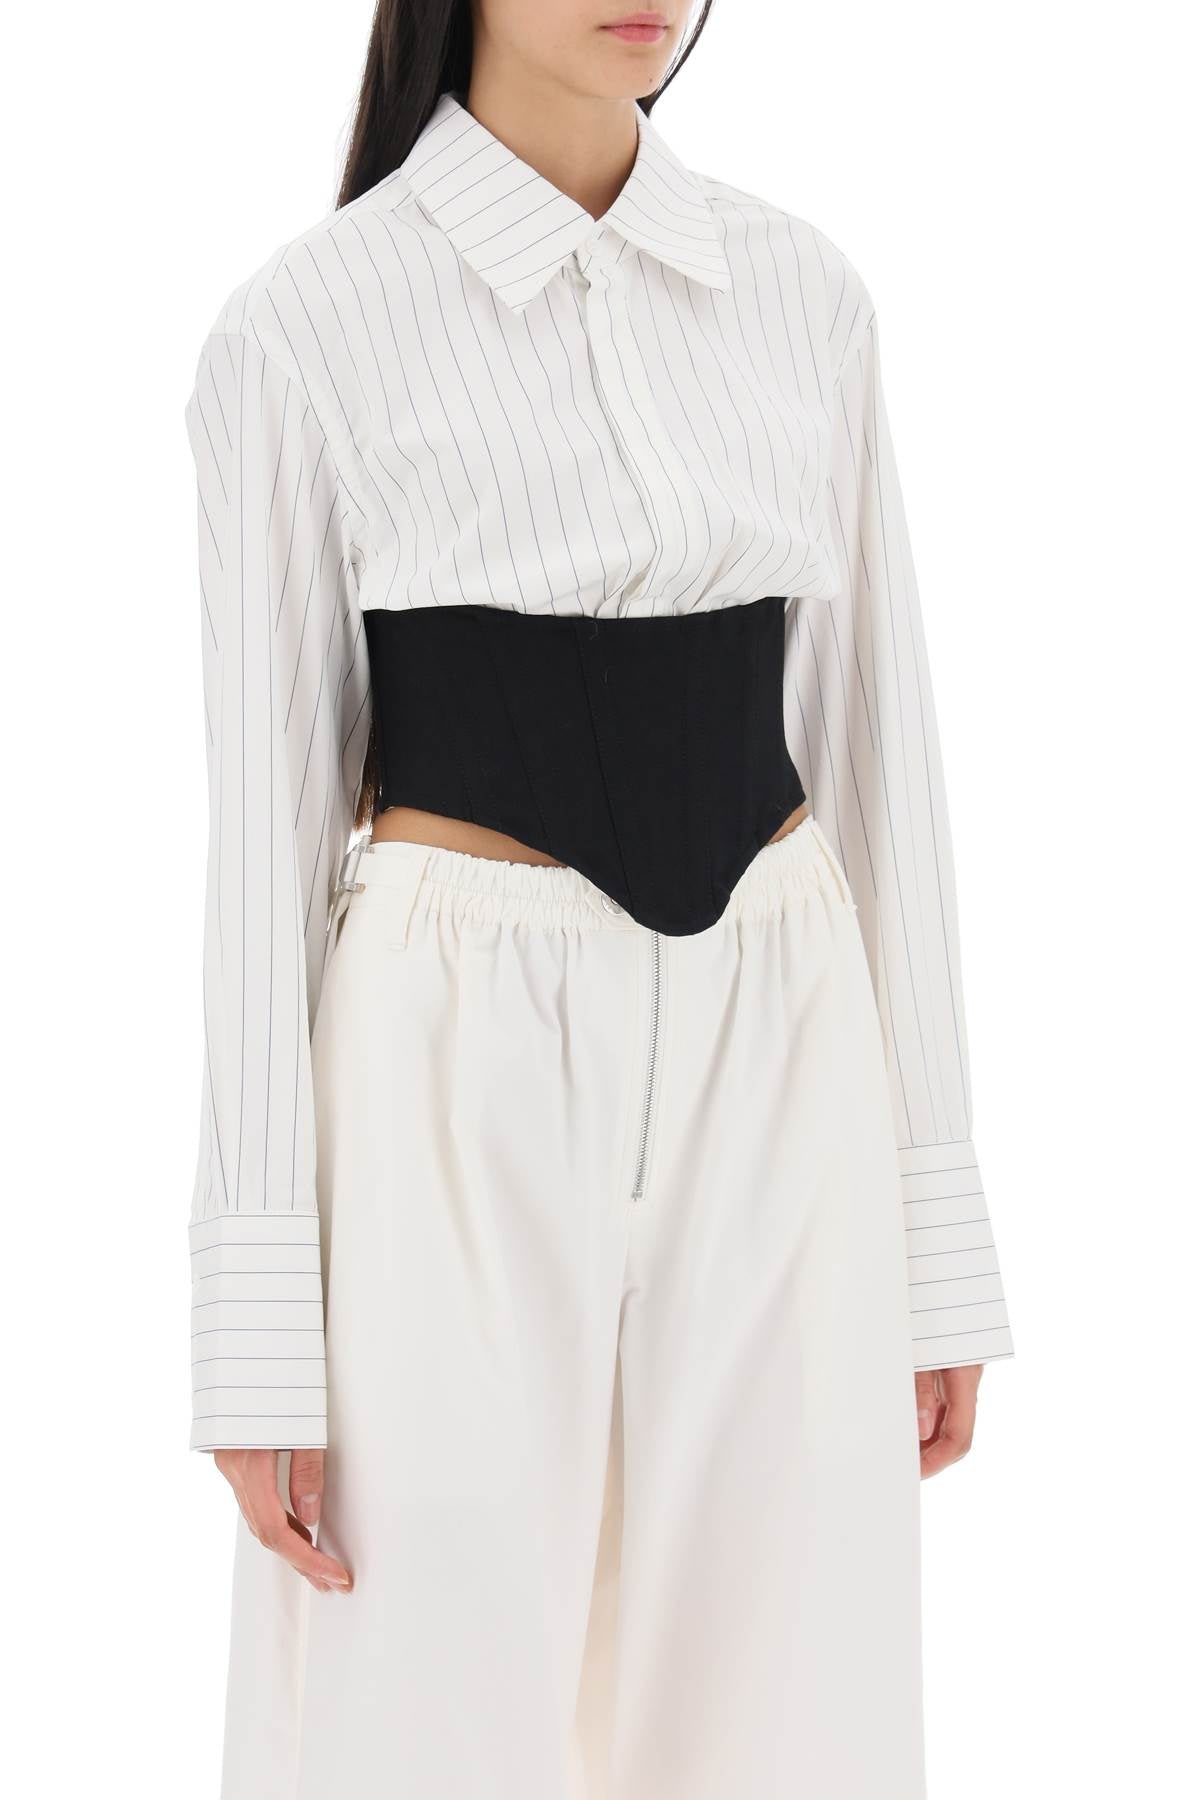 Dion lee cropped shirt with underbust corset-1